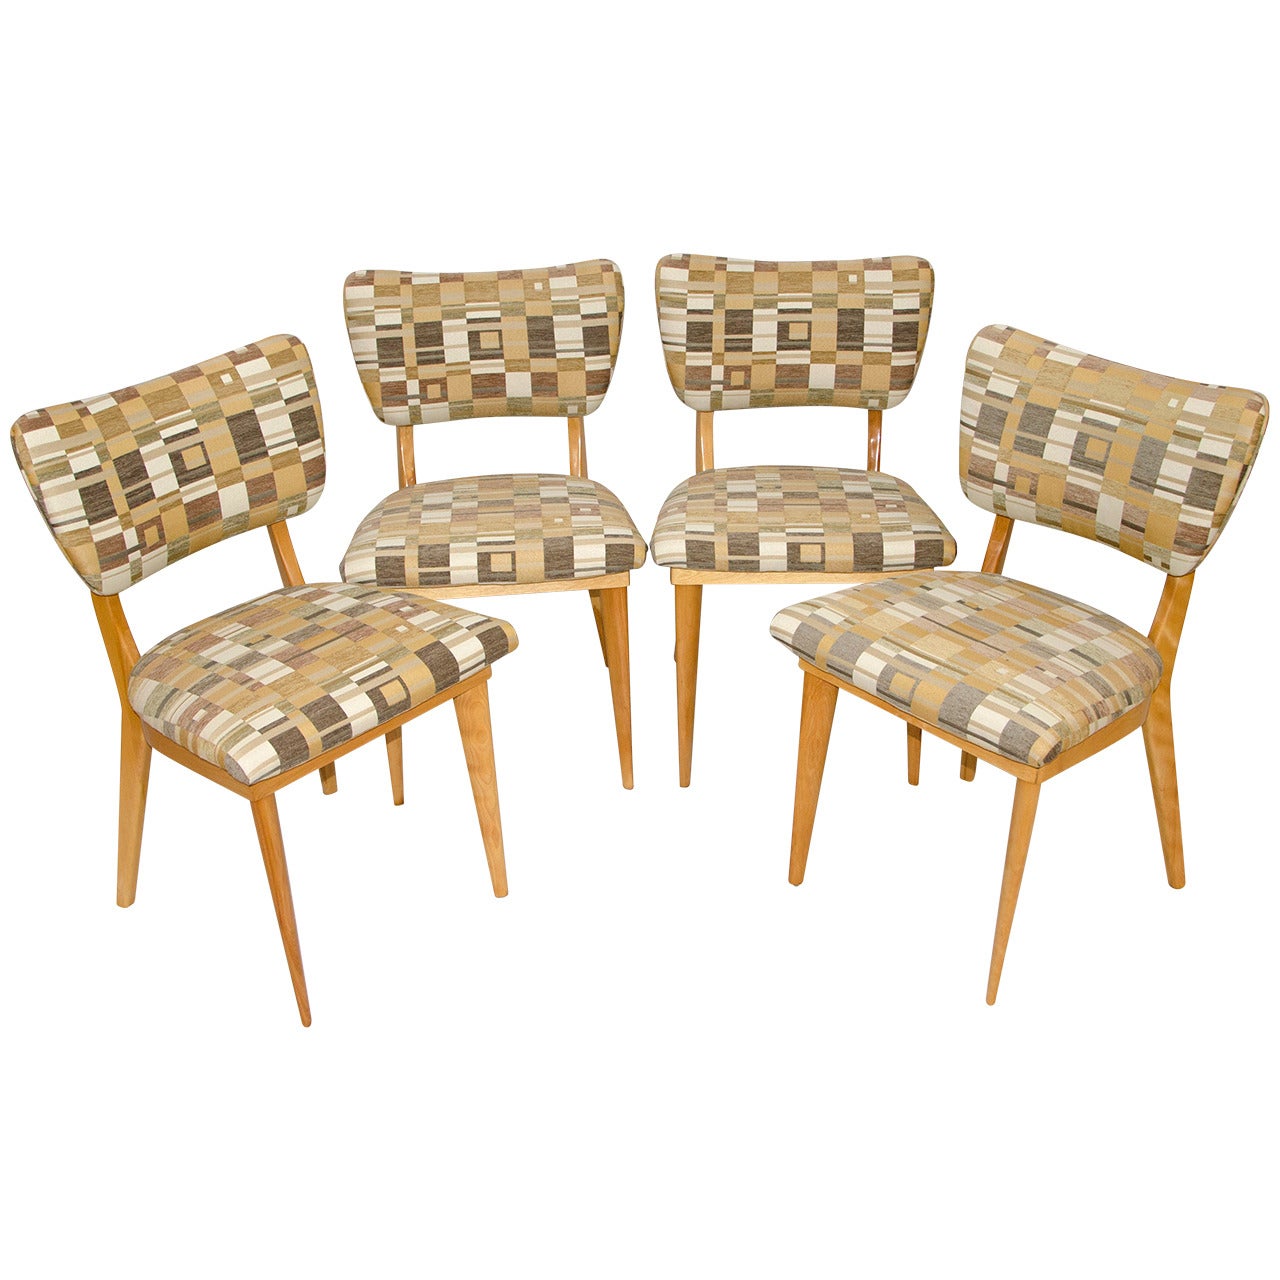 Four Mid Century Dining Chairs - Heywood Wakefield